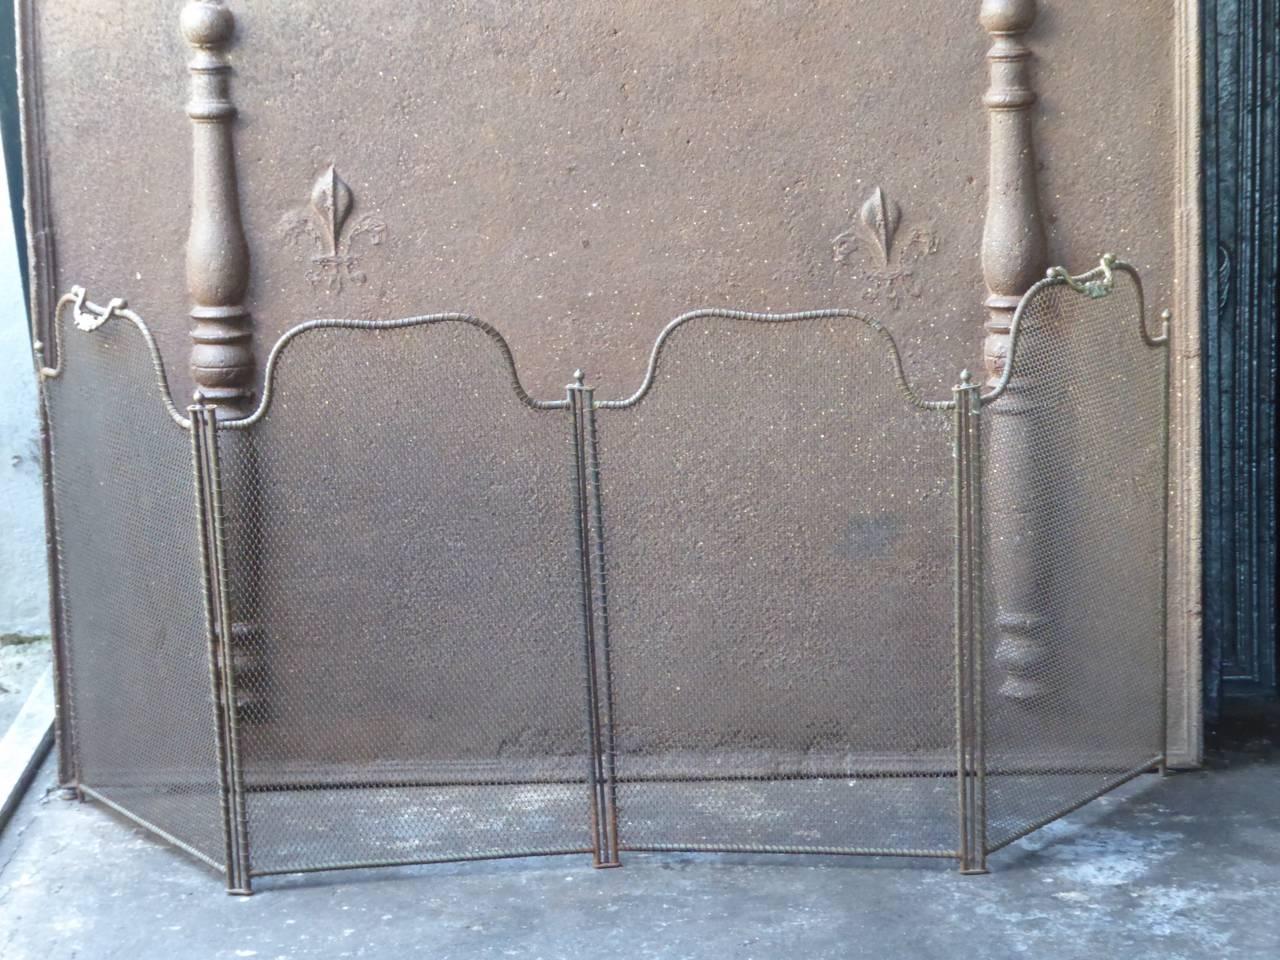 19th century French Victorian fireplace screen made of iron and iron mesh.

We have a unique and specialized collection of antique and used fireplace accessories consisting of more than 1000 listings at 1stdibs. Amongst others we always have 300+